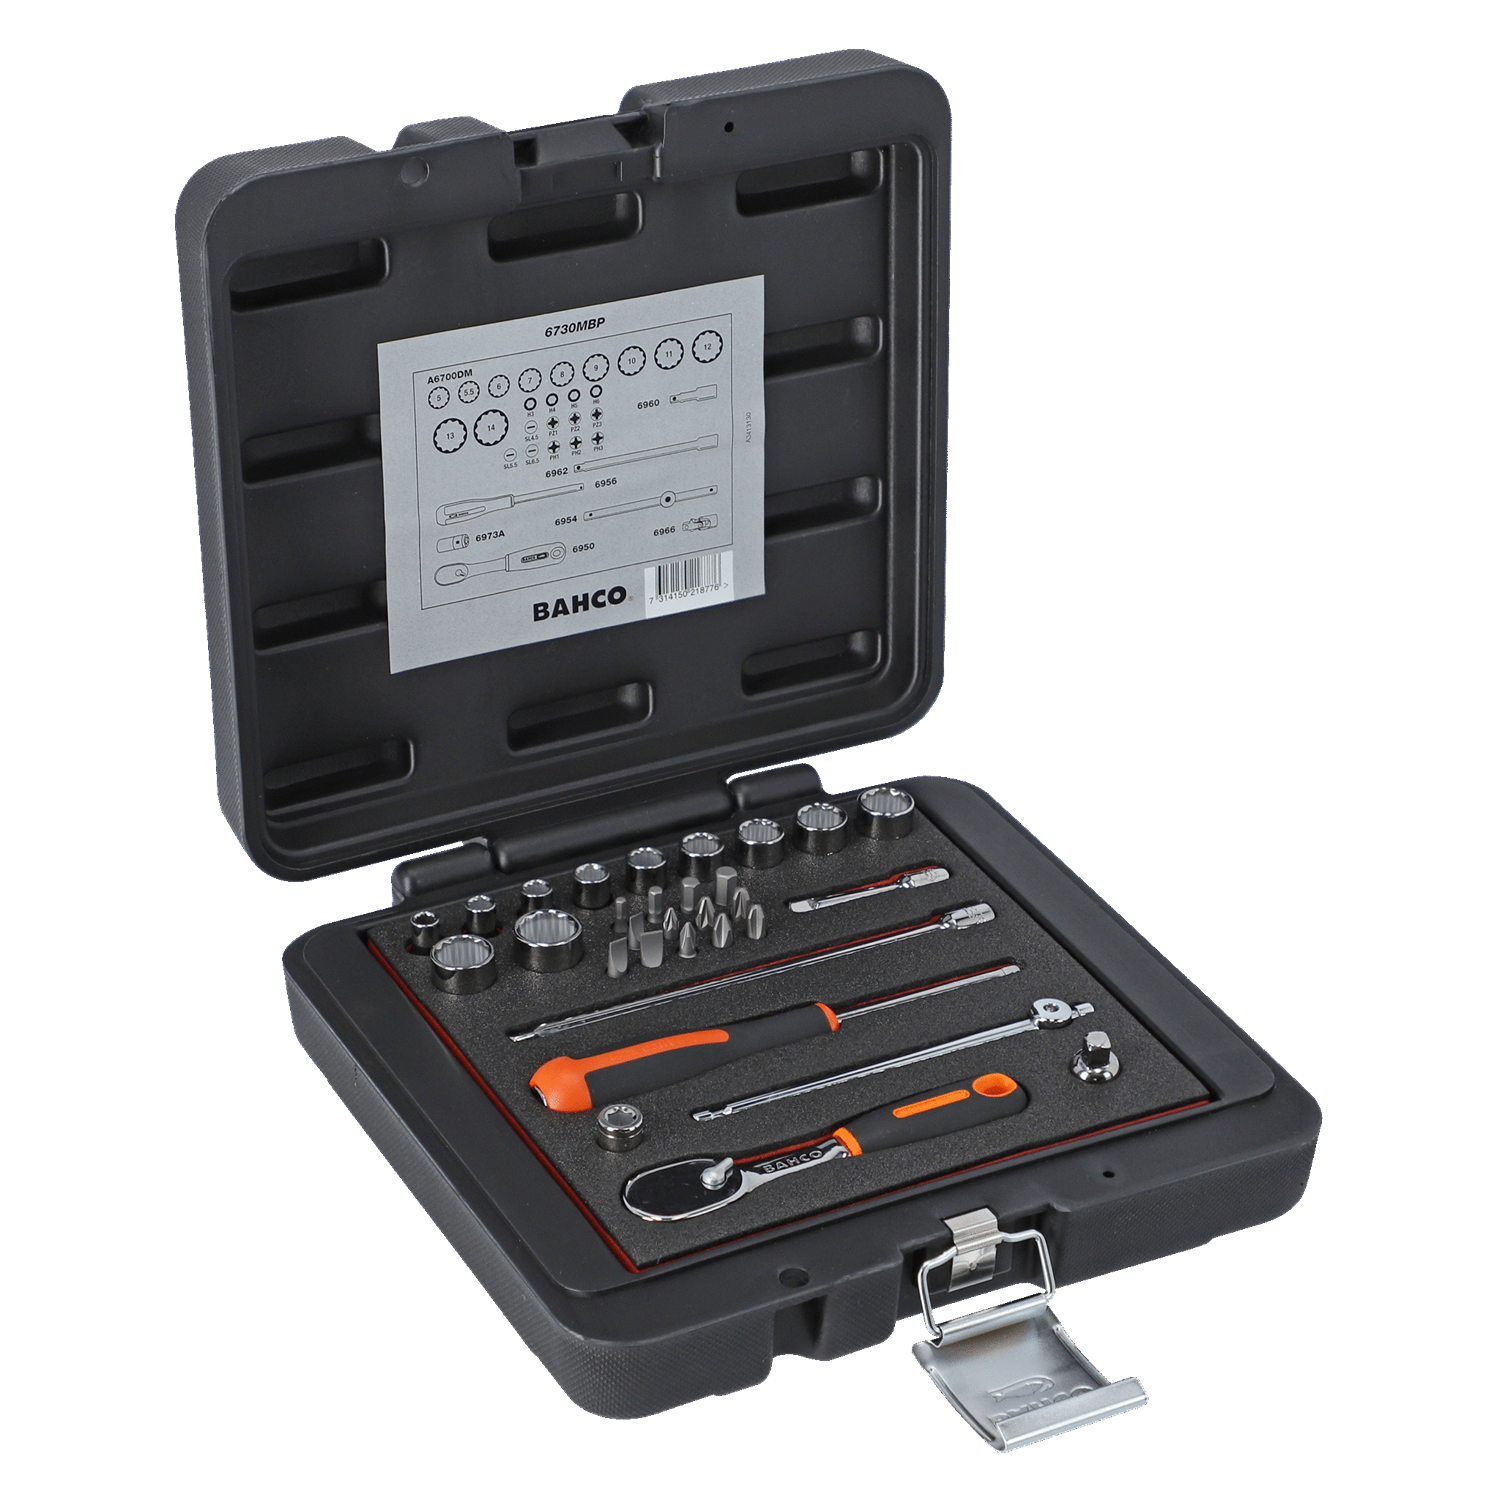 BAHCO 6730MBP 1/4” Square Drive Socket Set With Metric Bi-Hex - Premium Socket Set from BAHCO - Shop now at Yew Aik.